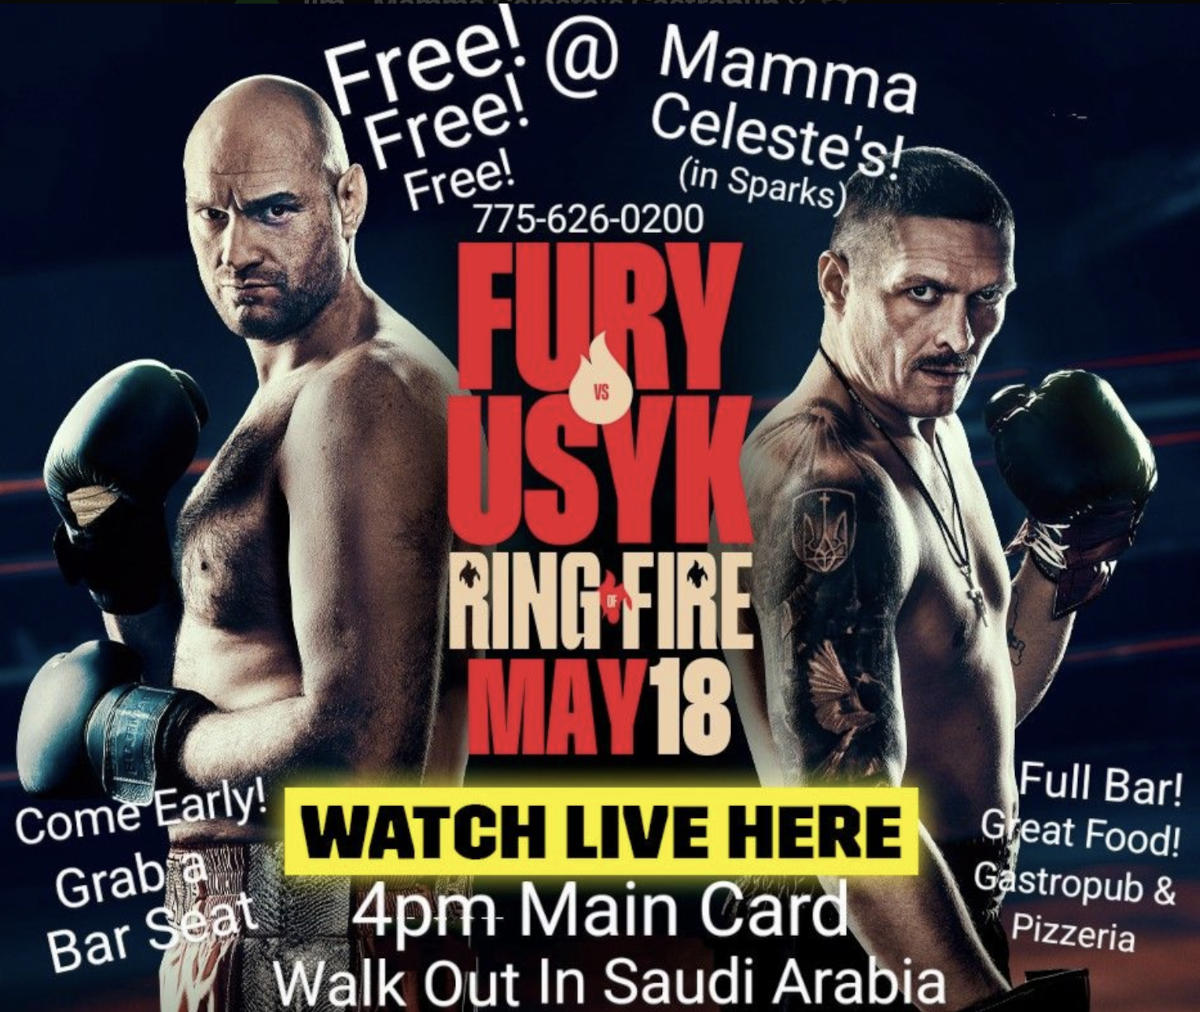 Fury vs Usyk ring of fire flyer